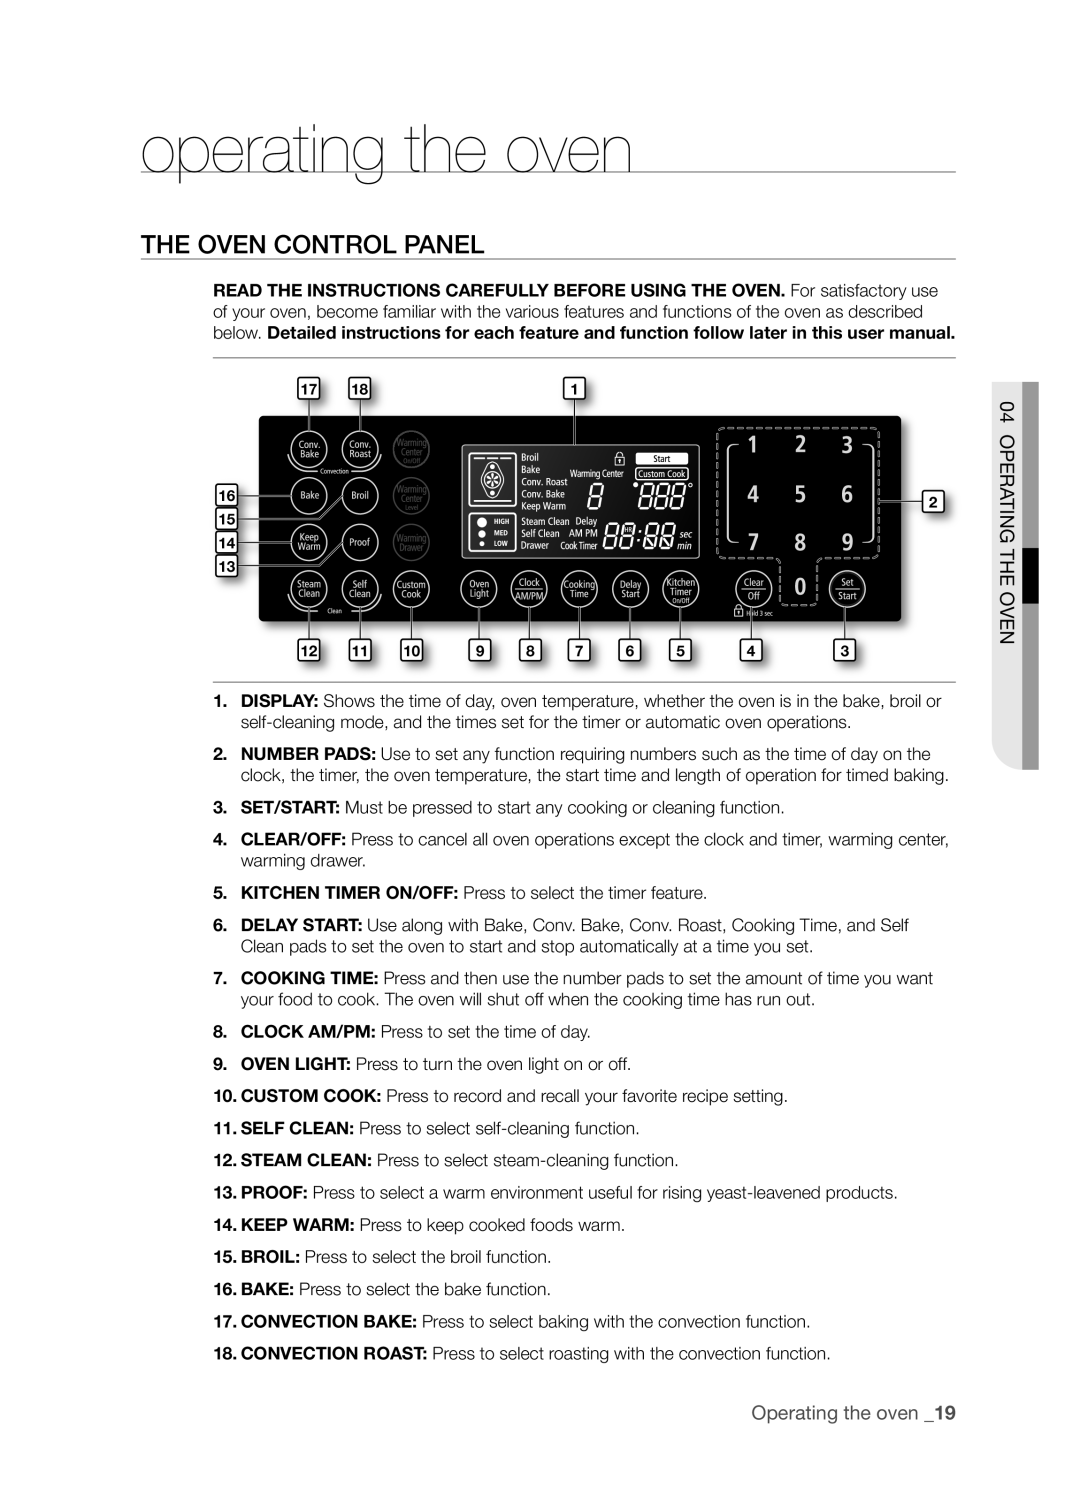 Samsung FTQ386LWX user manual operating the oven, The Oven Control Panel, Operating The Oven, Operating the oven _19 